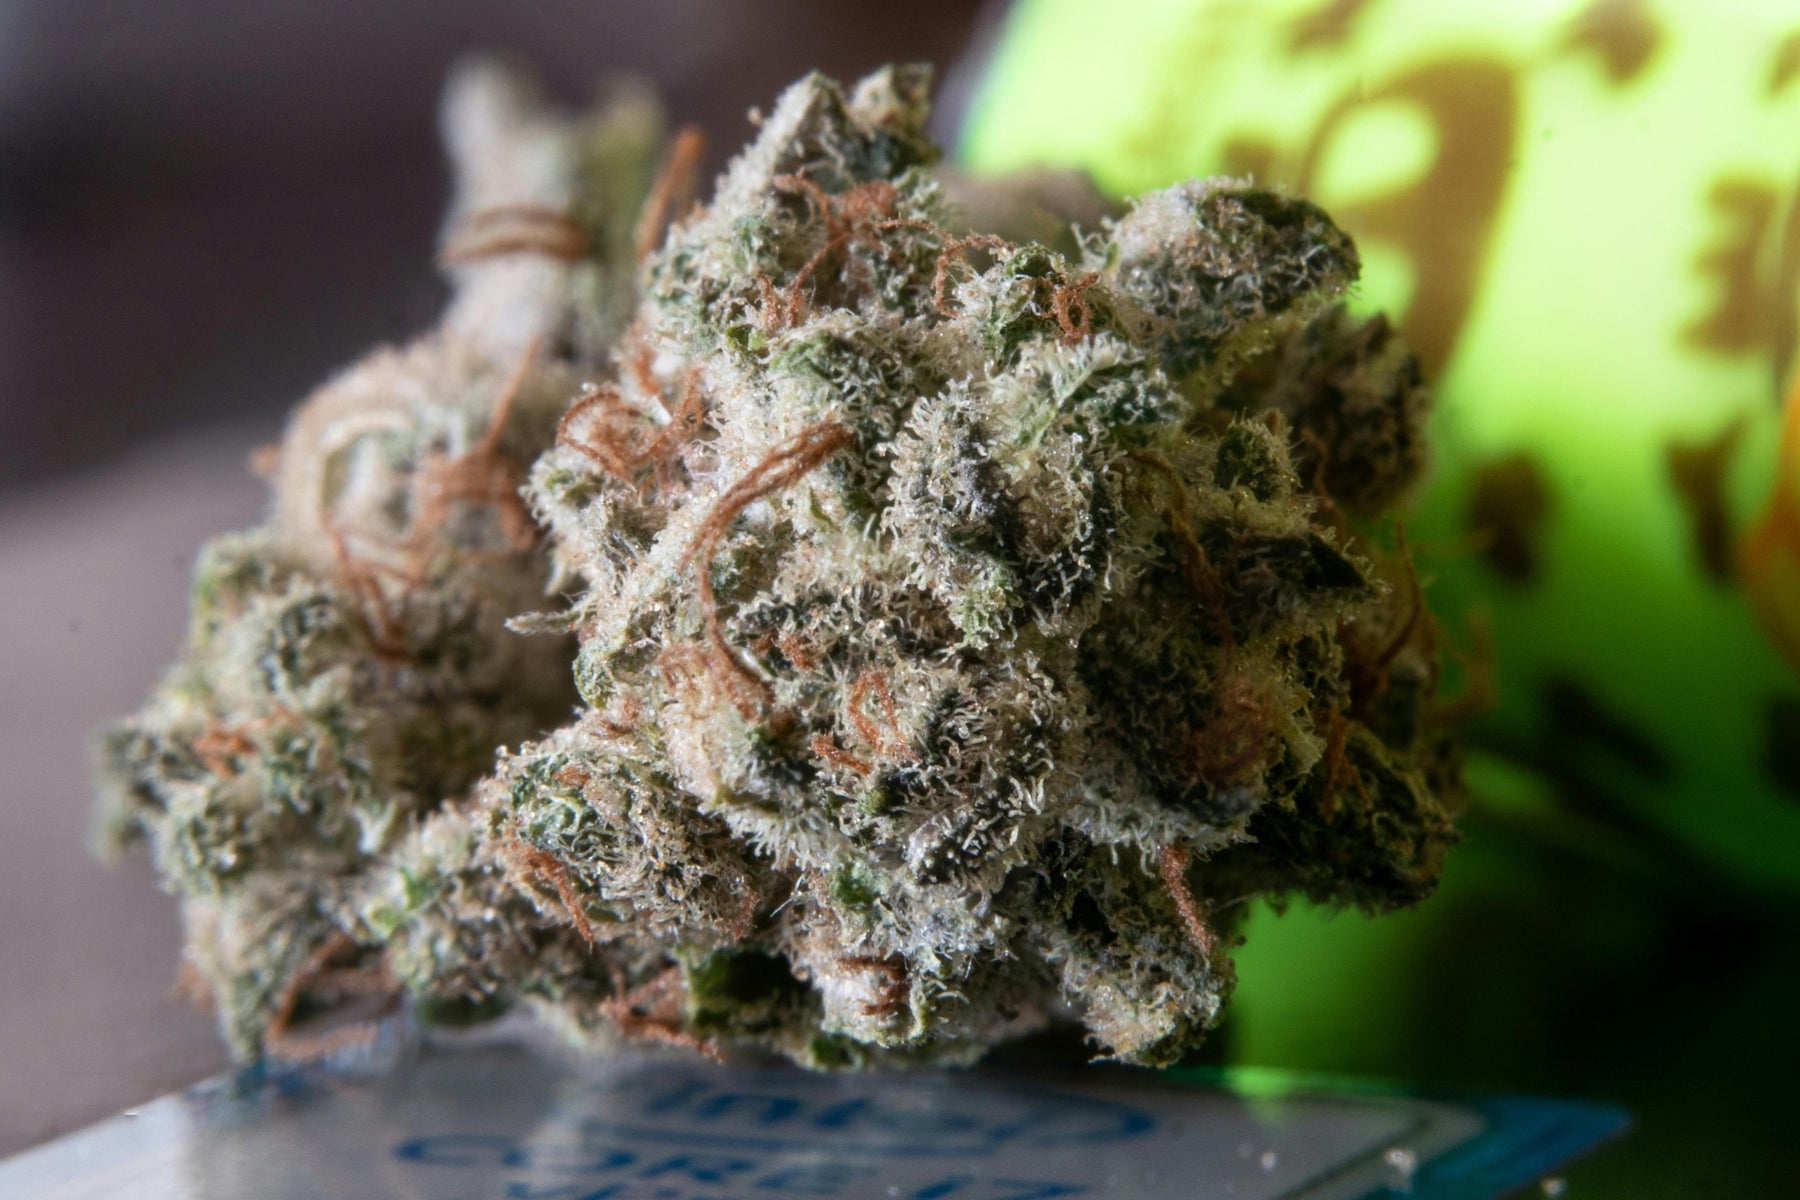 The Top 10 Most Popular Cannabis Strains in Tennessee